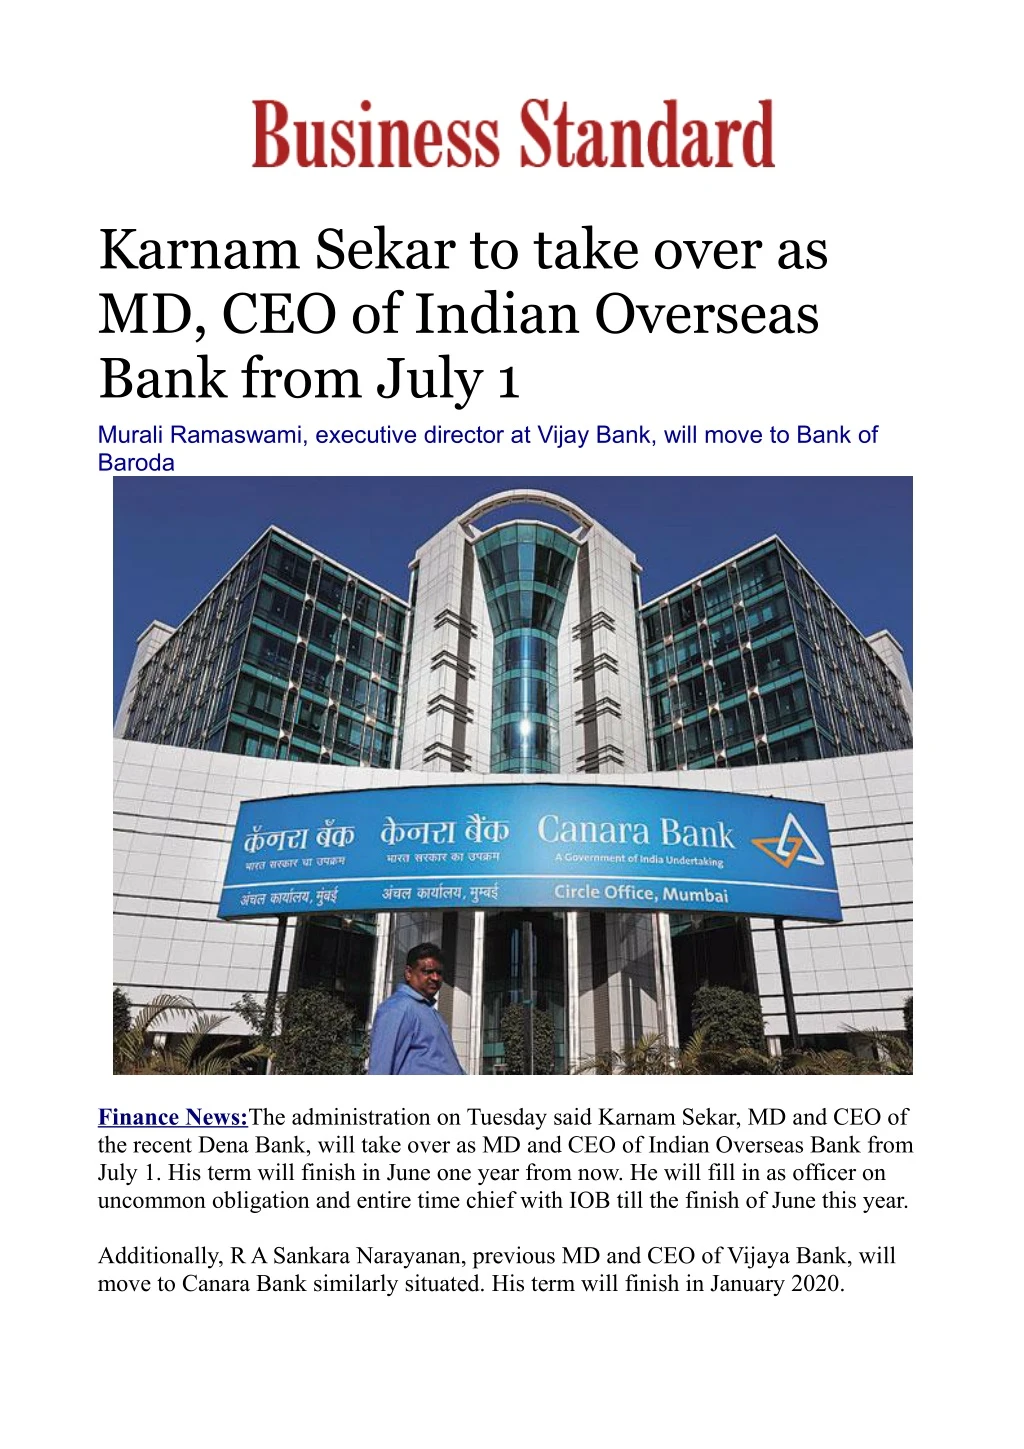 karnam sekar to take over as md ceo of indian